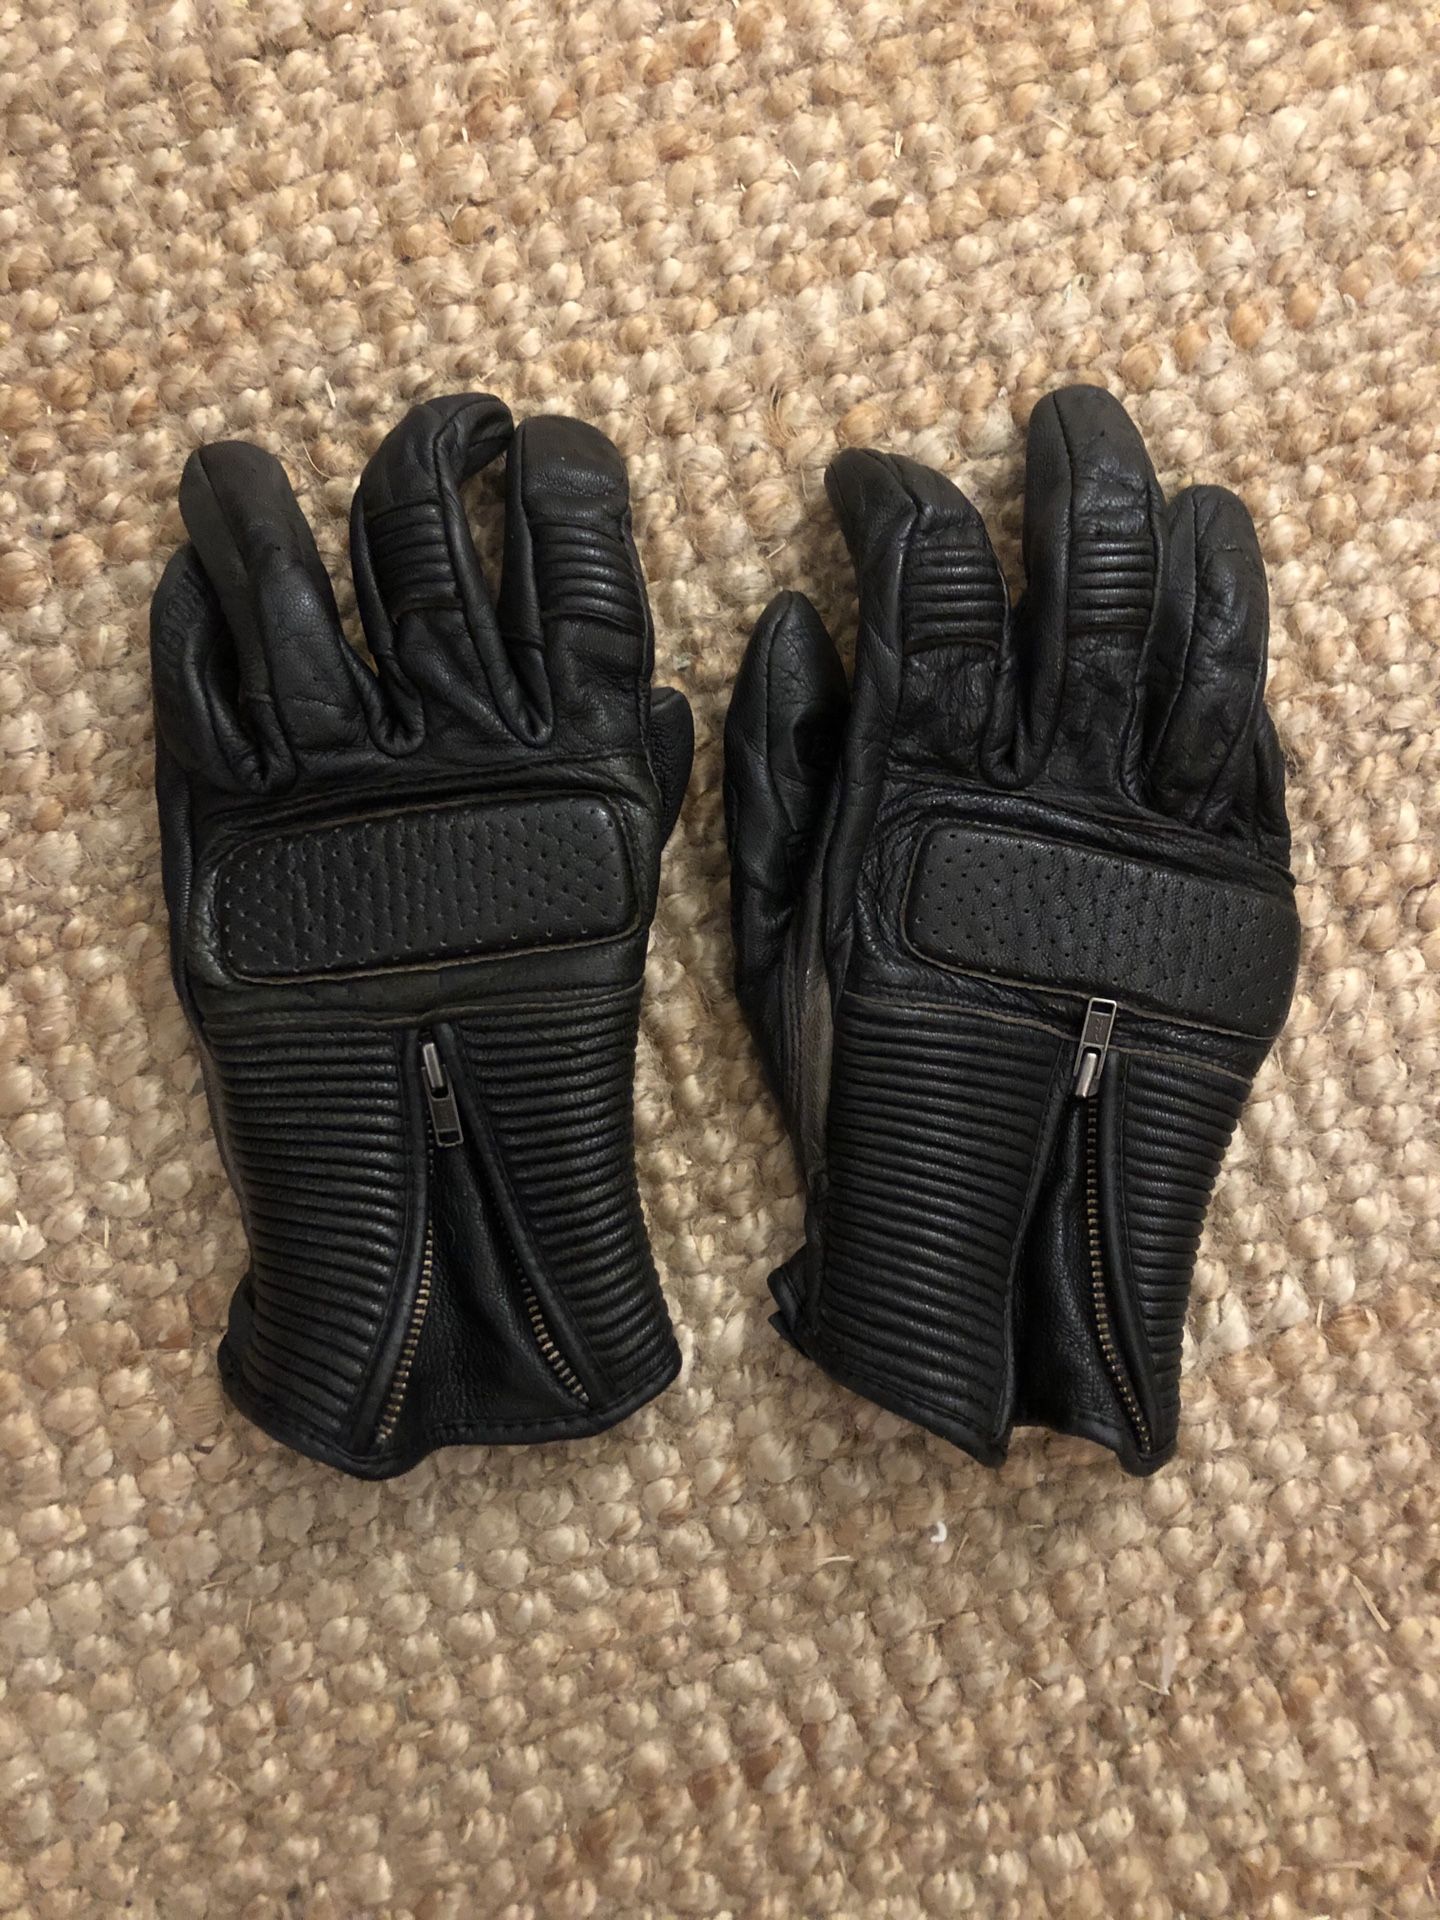 Black Leather Motorcycle Gloves from Joe Rocket (Accident Free)